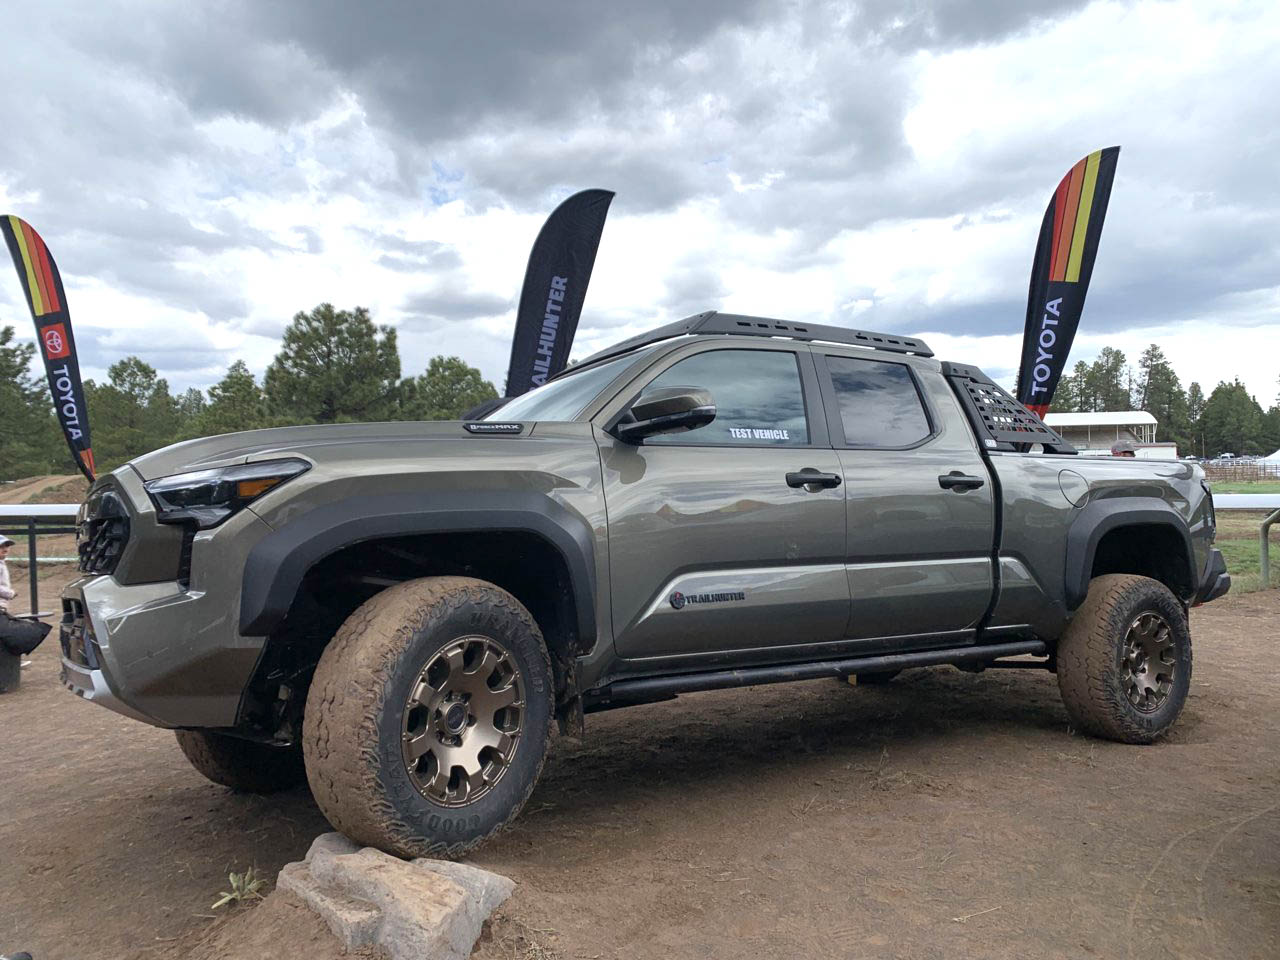 2024 Tacoma 2024 Tacoma TRAILHUNTER - Specs, Price (TBA) Features, Photos & Videos Trailhunter Tacoma 2024 4th gen Overland Expo